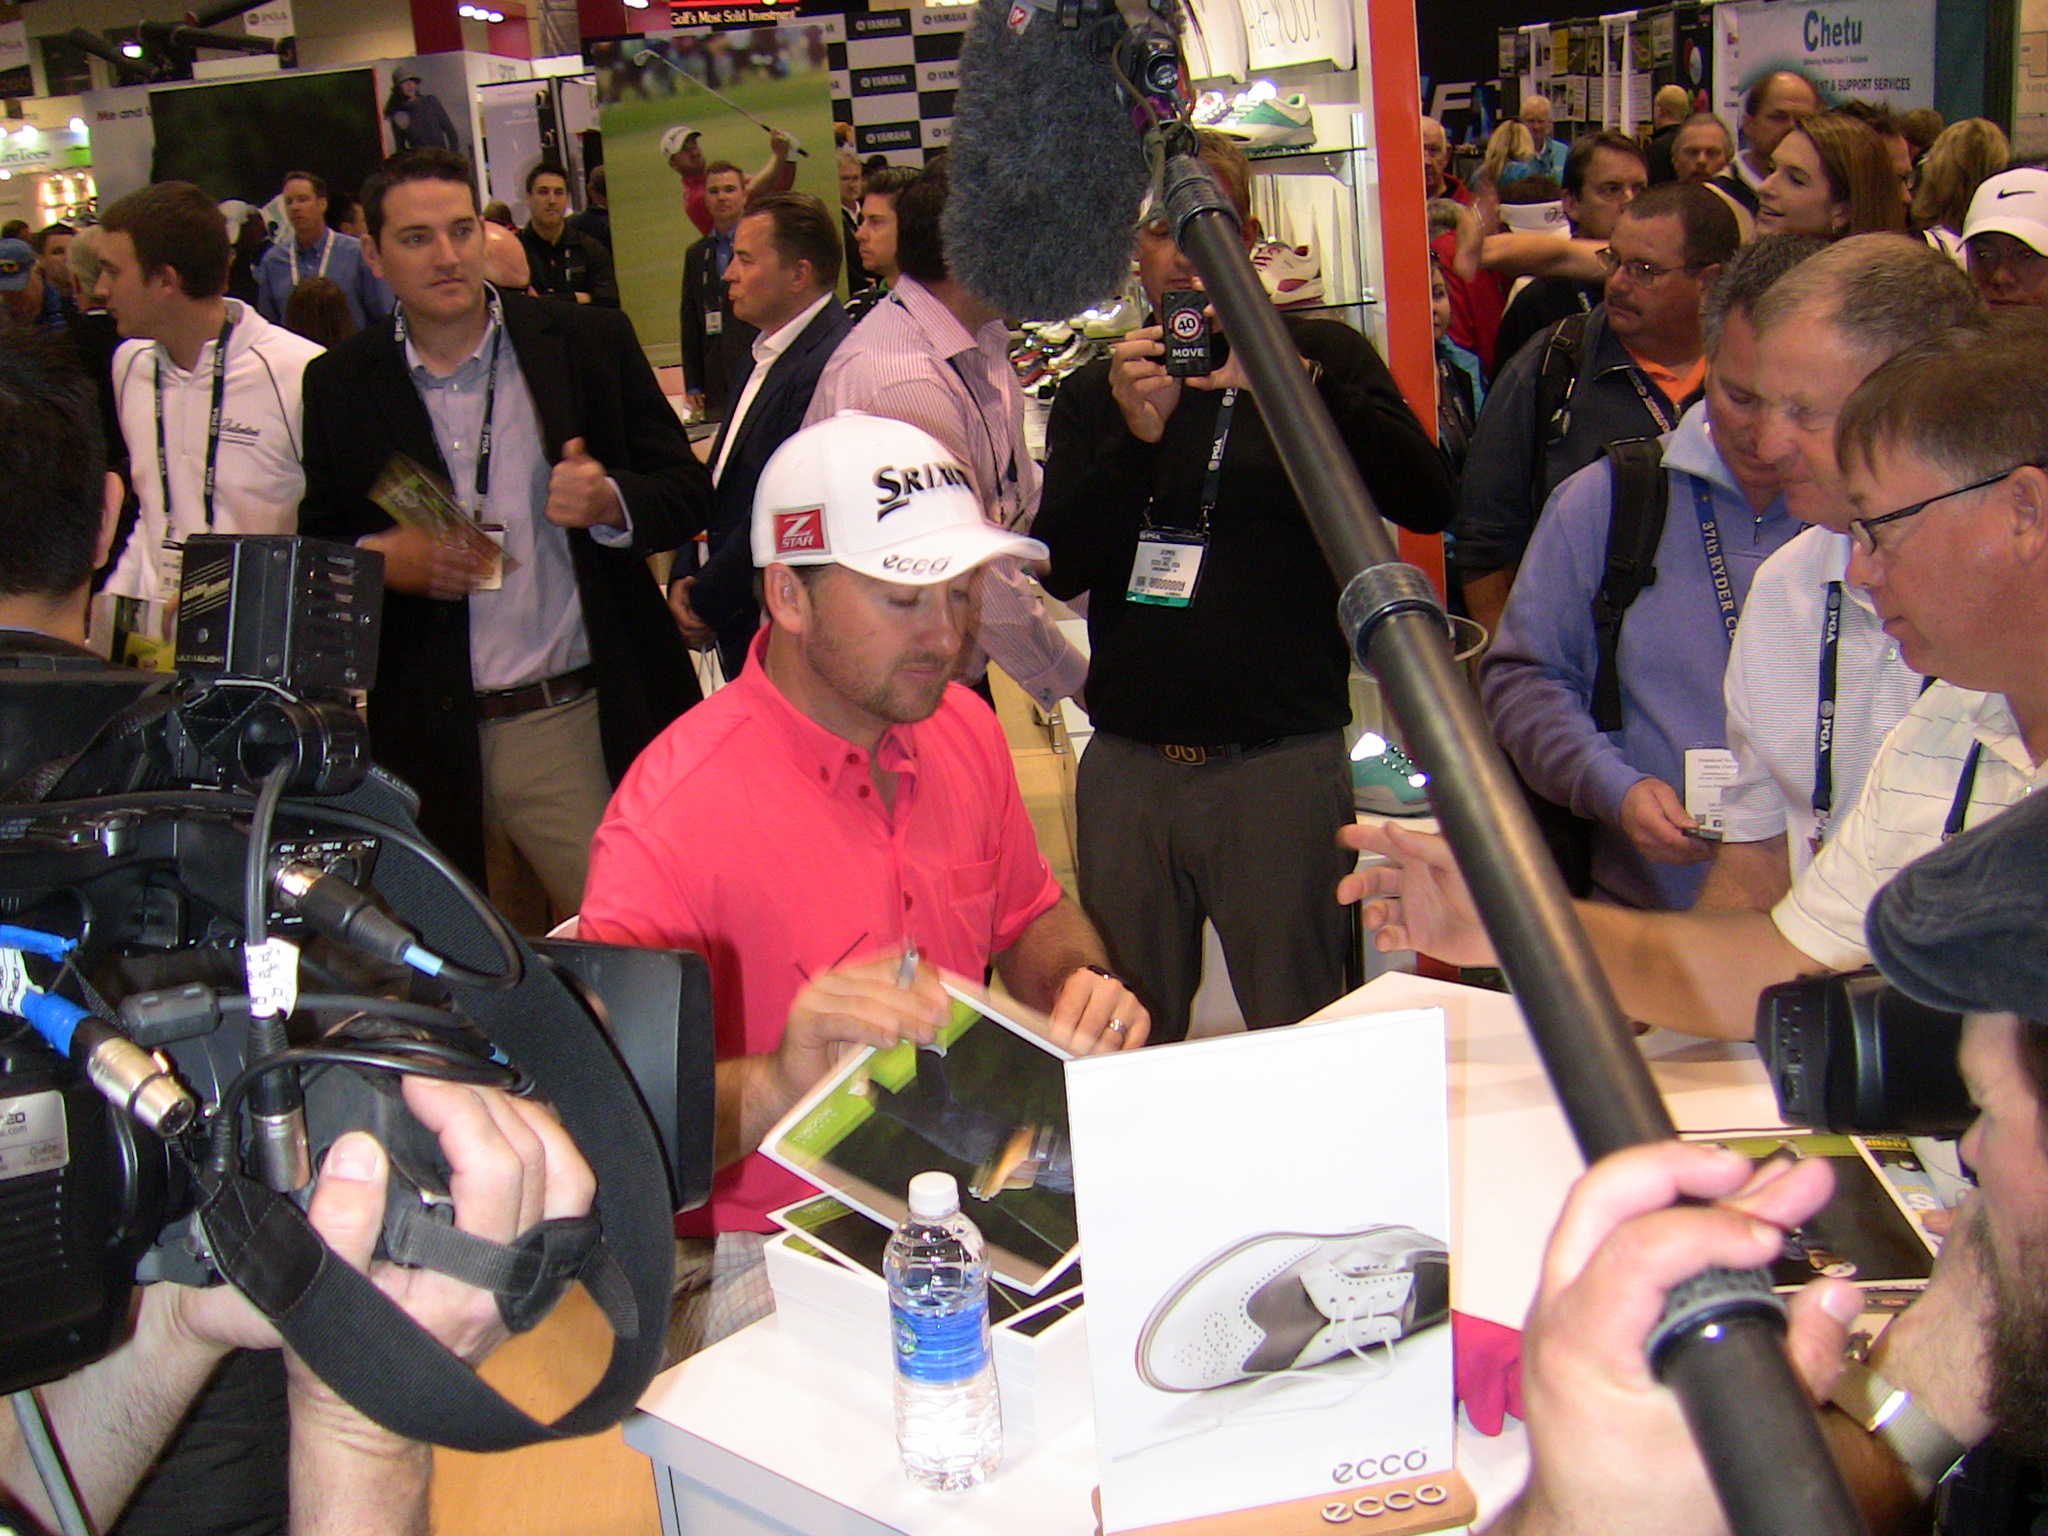 PGA Tour professional Graeme McDowell was one of the many golf celebrities on hand for the first day of the 61st PGA Merchandise Show.